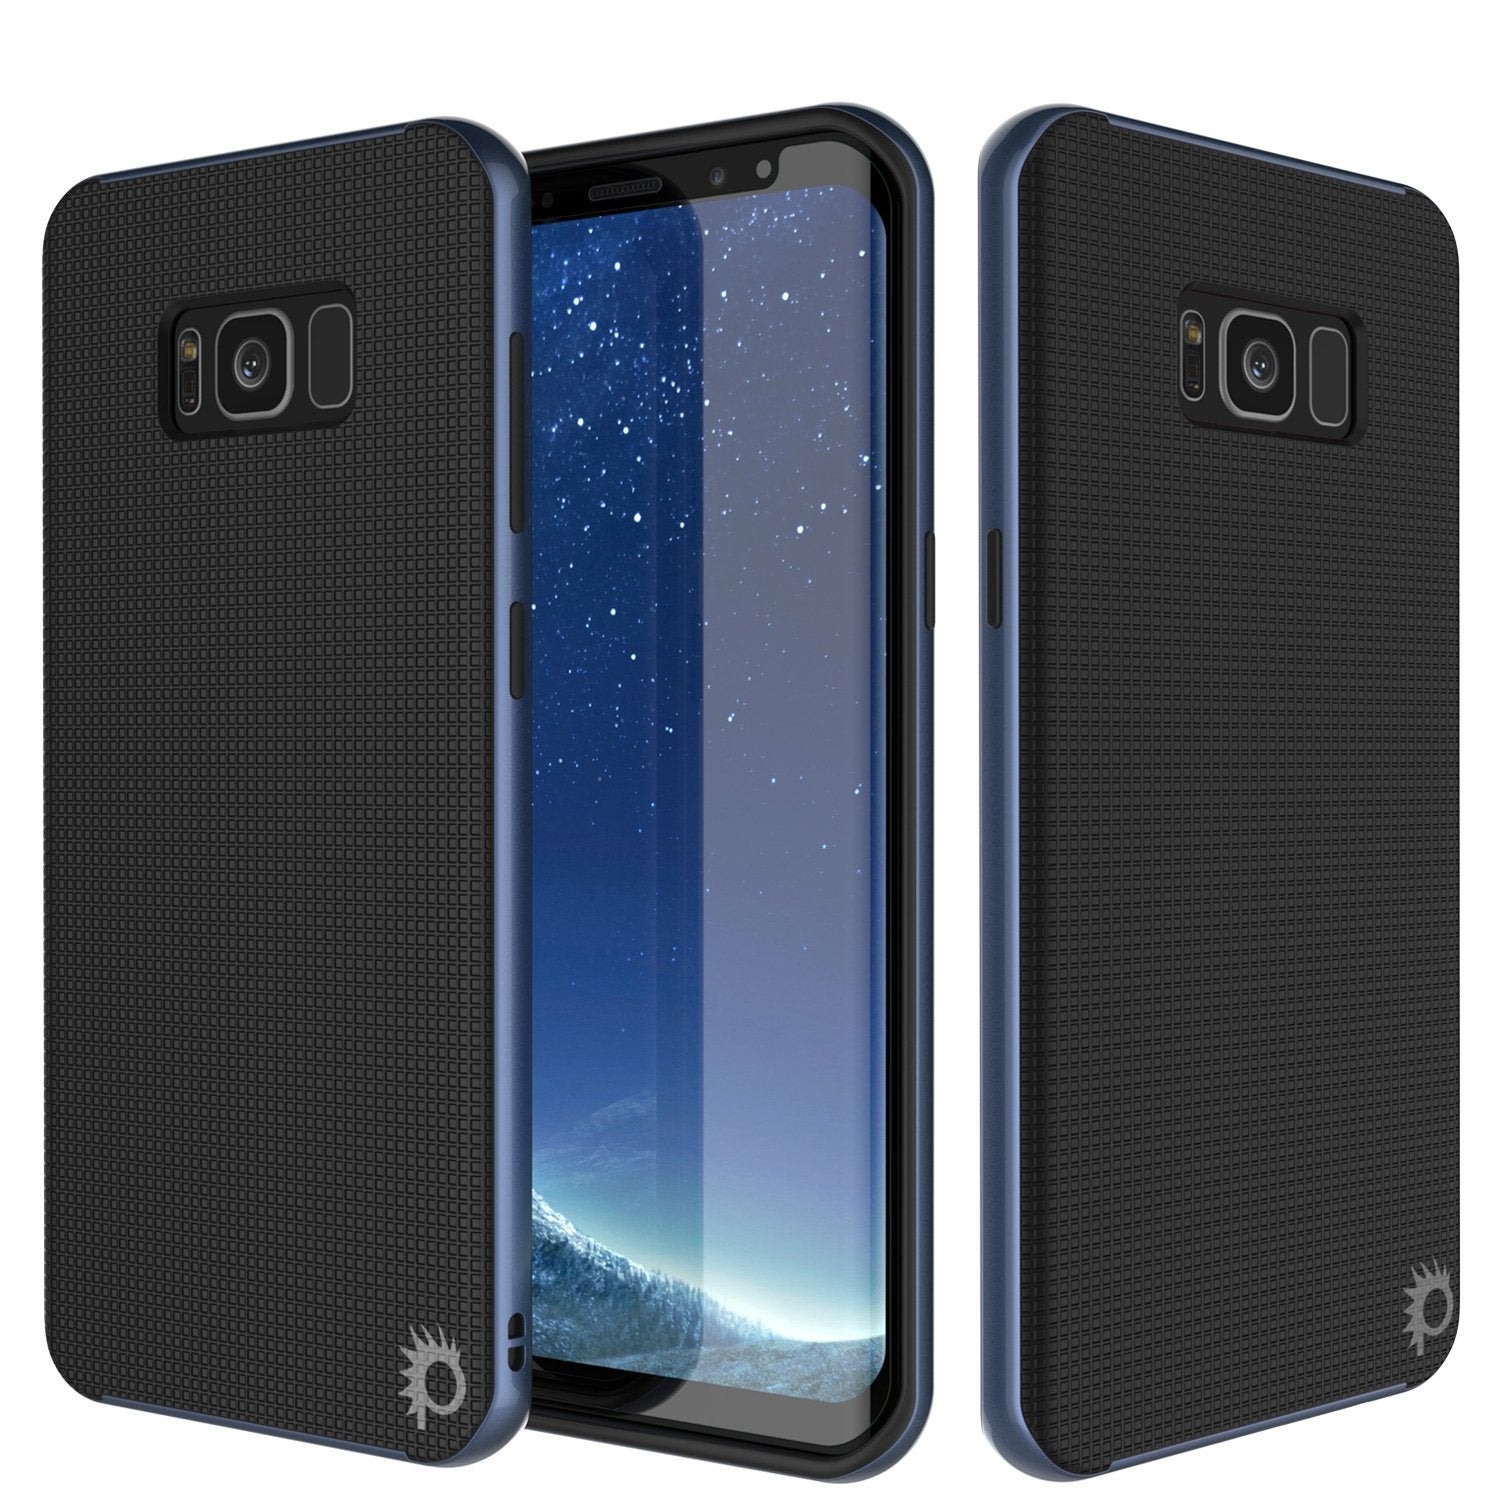 Galaxy S8 Case, PunkCase [Stealth Series] Hybrid 3-Piece Shockproof Dual Layer Cover [Non-Slip] [Soft TPU + PC Bumper] with PUNKSHIELD Screen Protector for Samsung S8 Edge [Navy Blue]